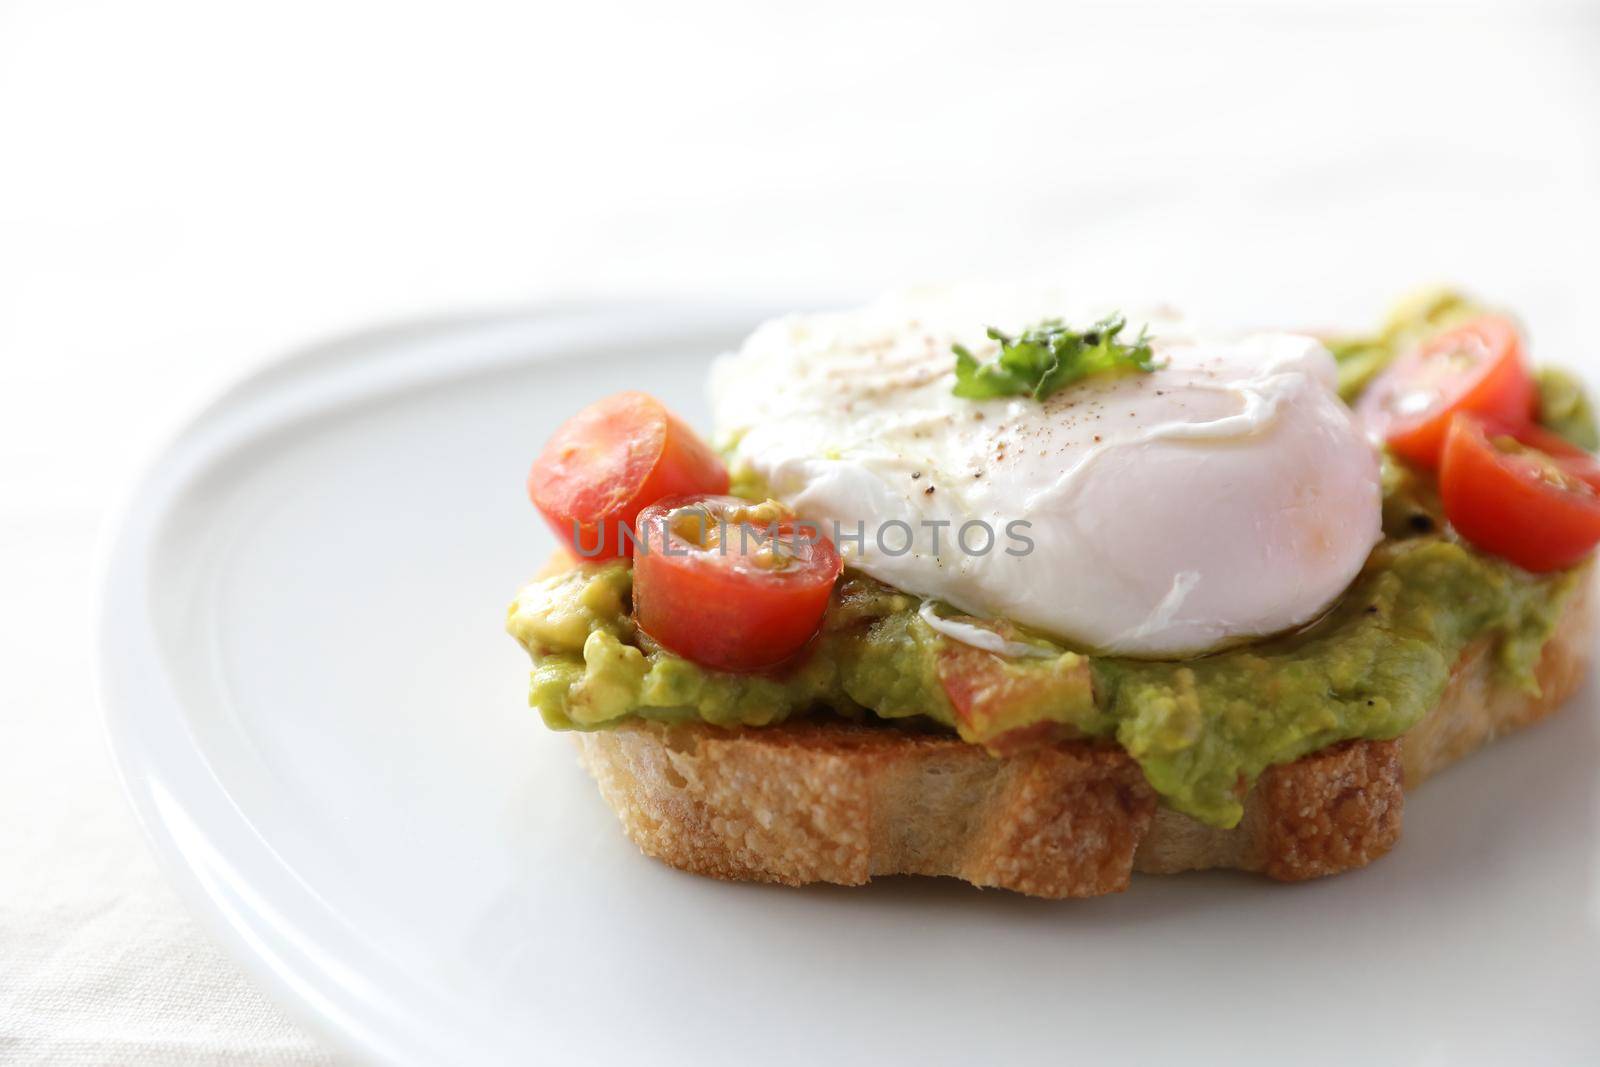 Poached eggs with avocado on toast in white background